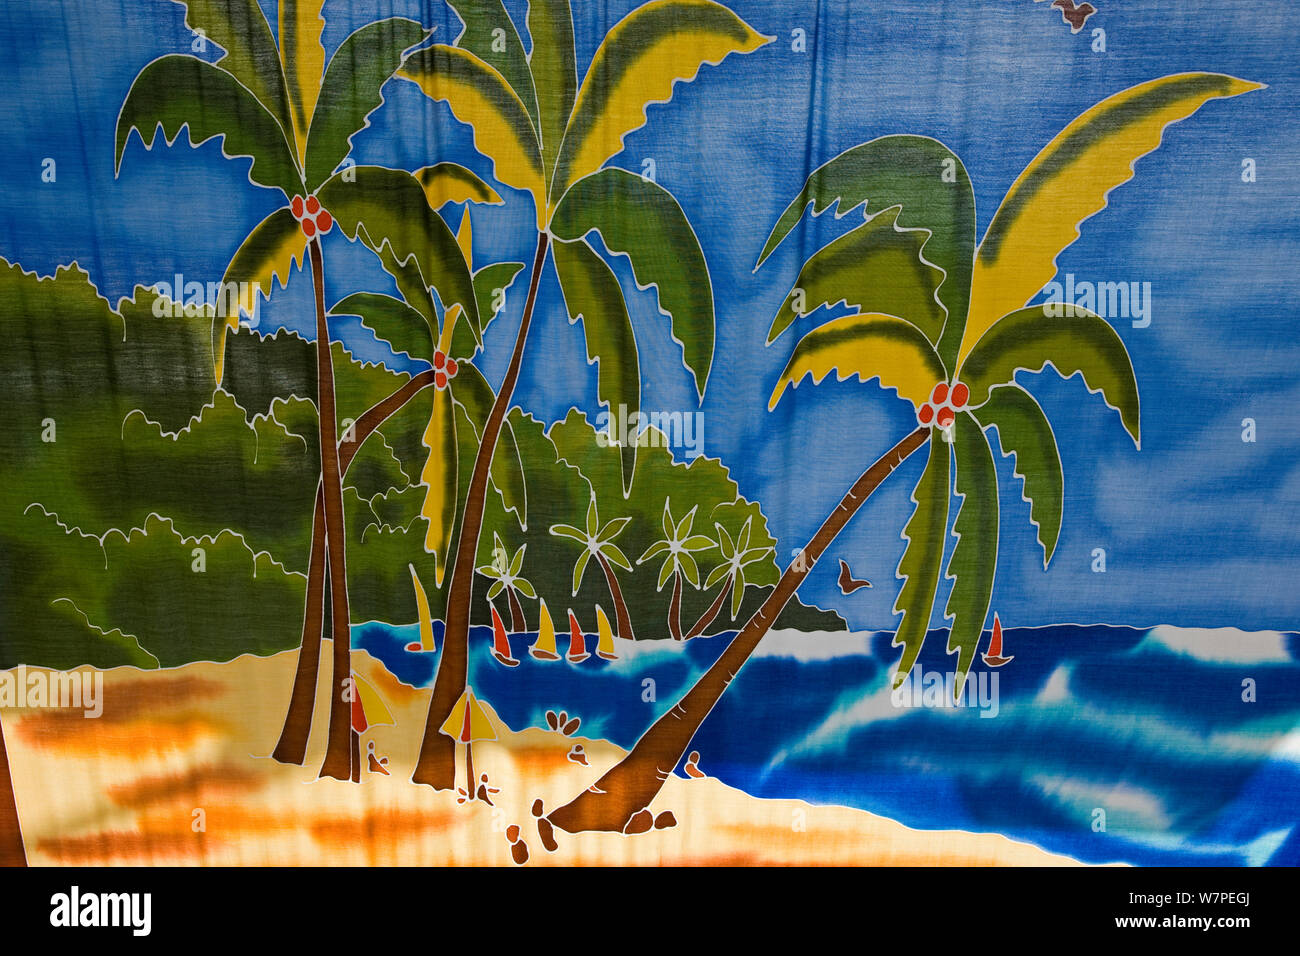 photography painting - stock and images Tropical Alamy hi-res